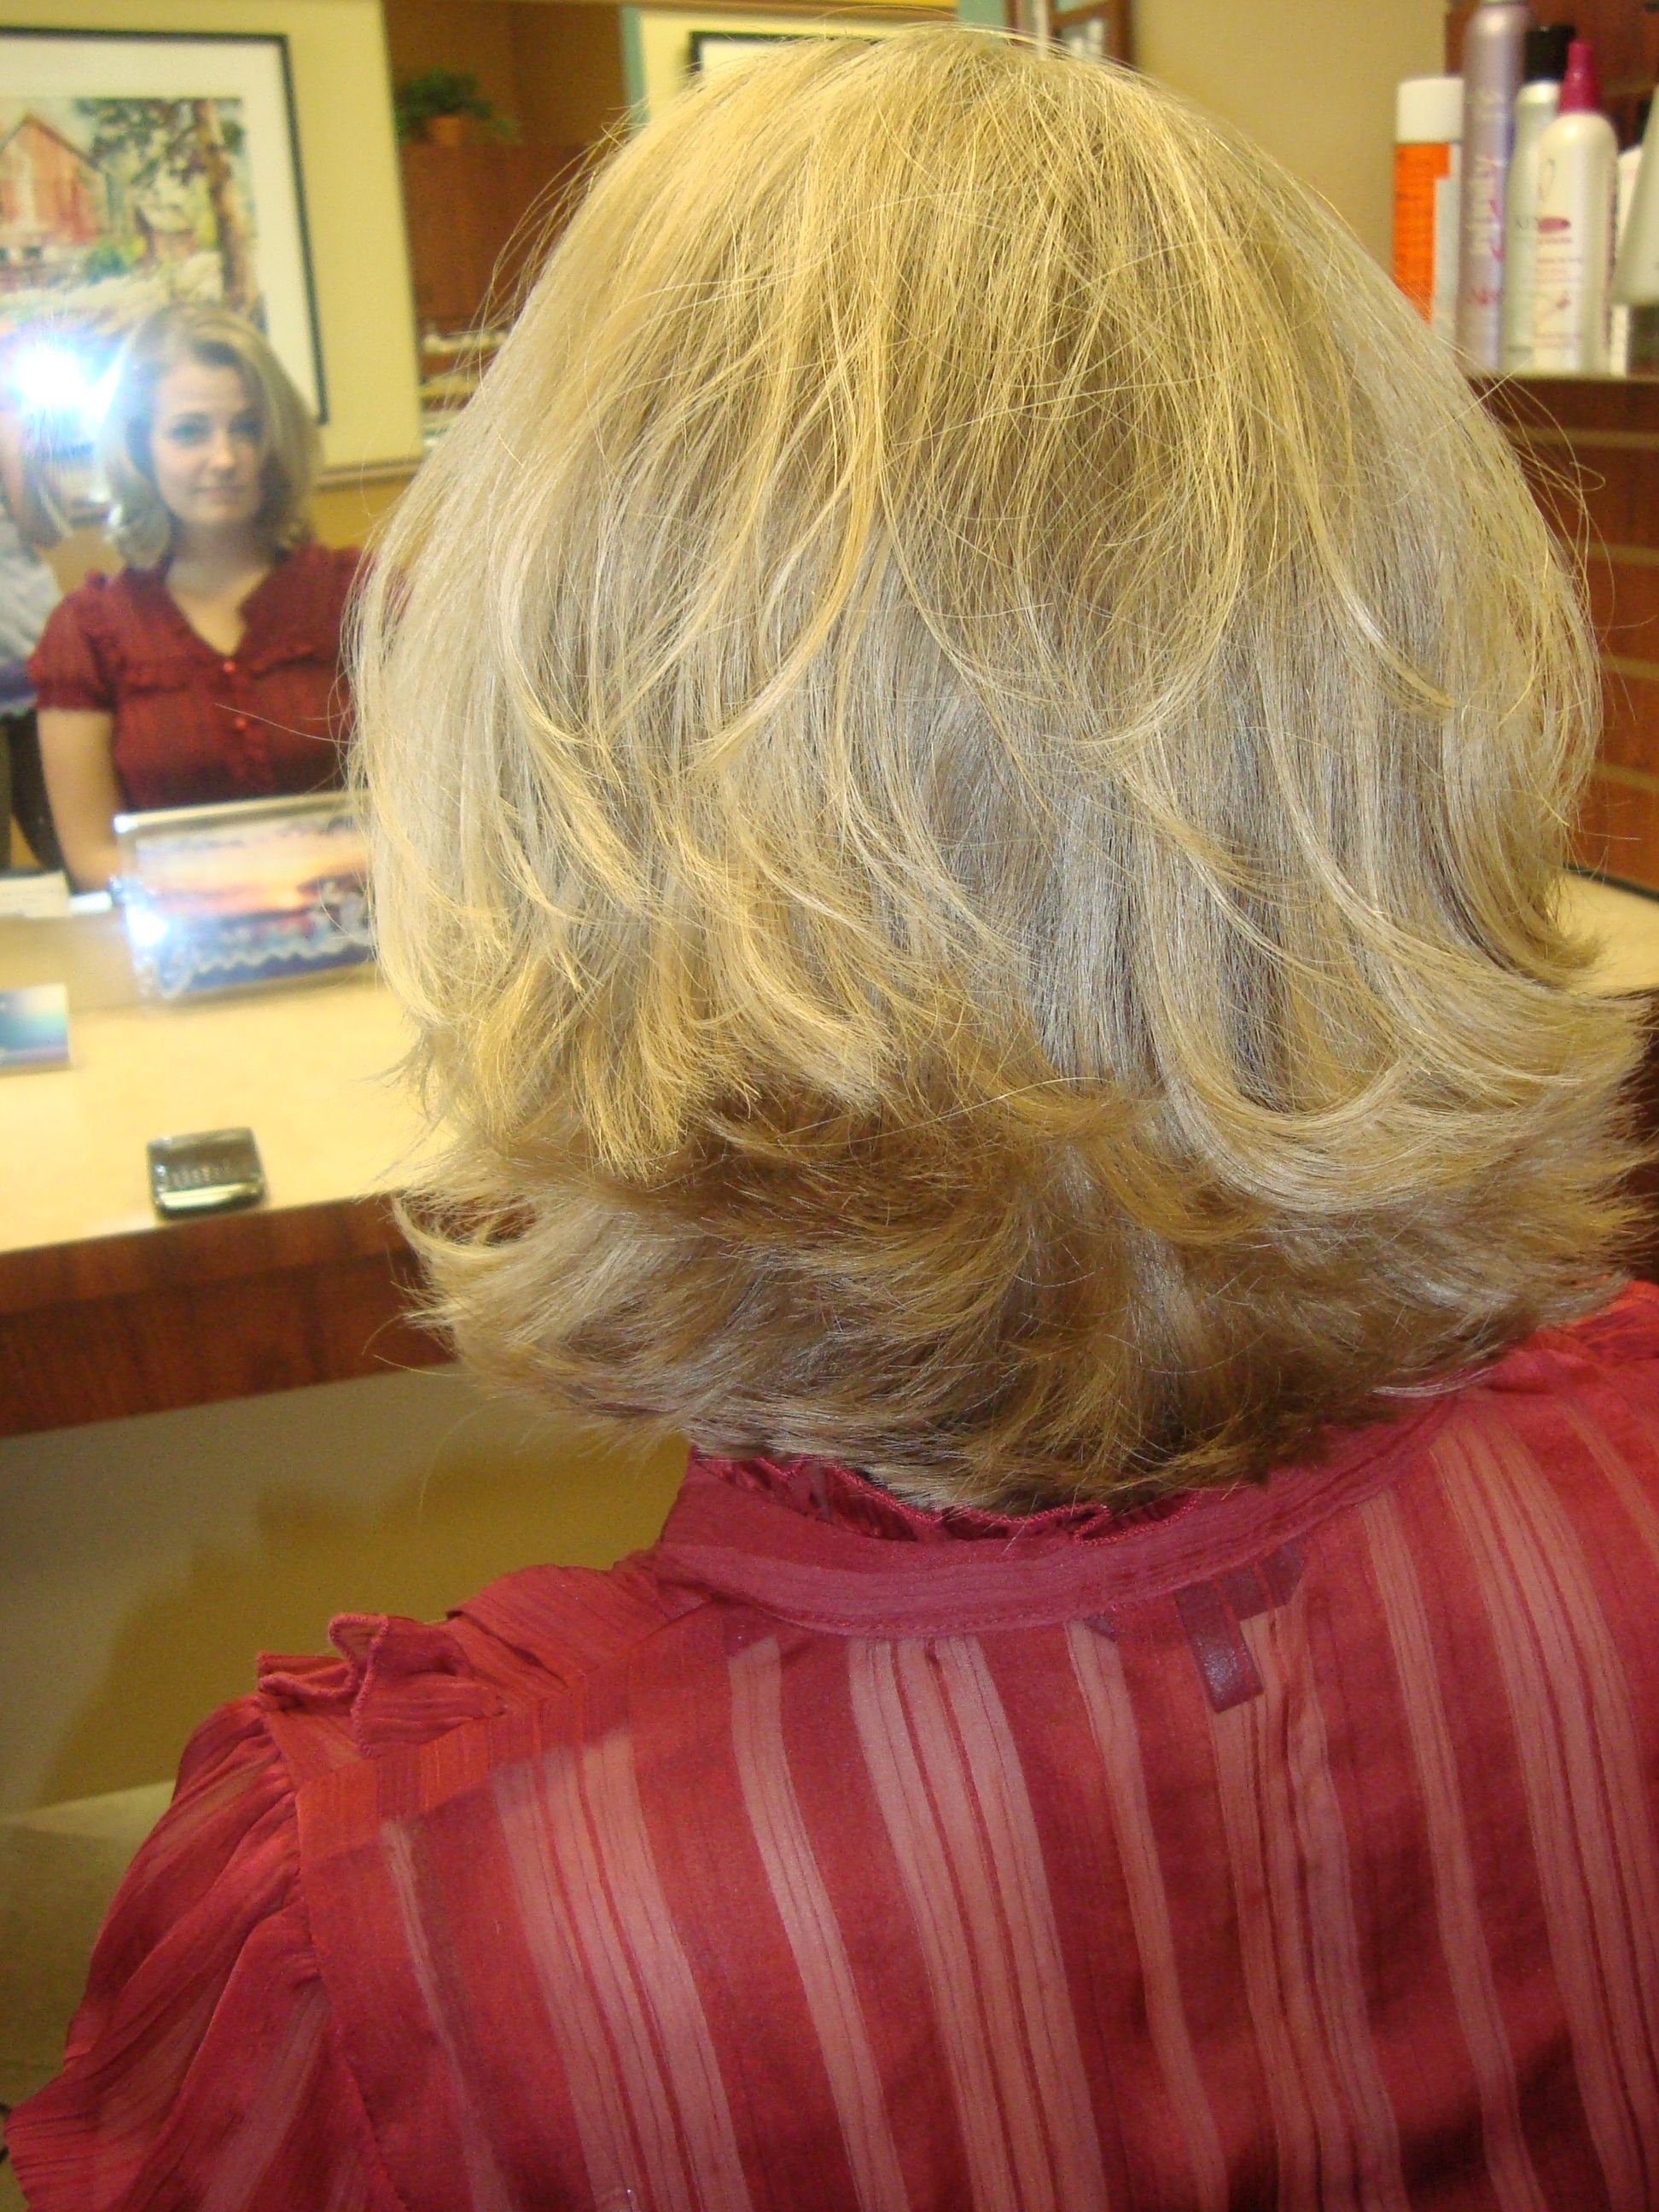 Short, Thick, And Blonde Flipped Hair, Low-Maintenance And with Pictures Of Short Flipped Hairstyle